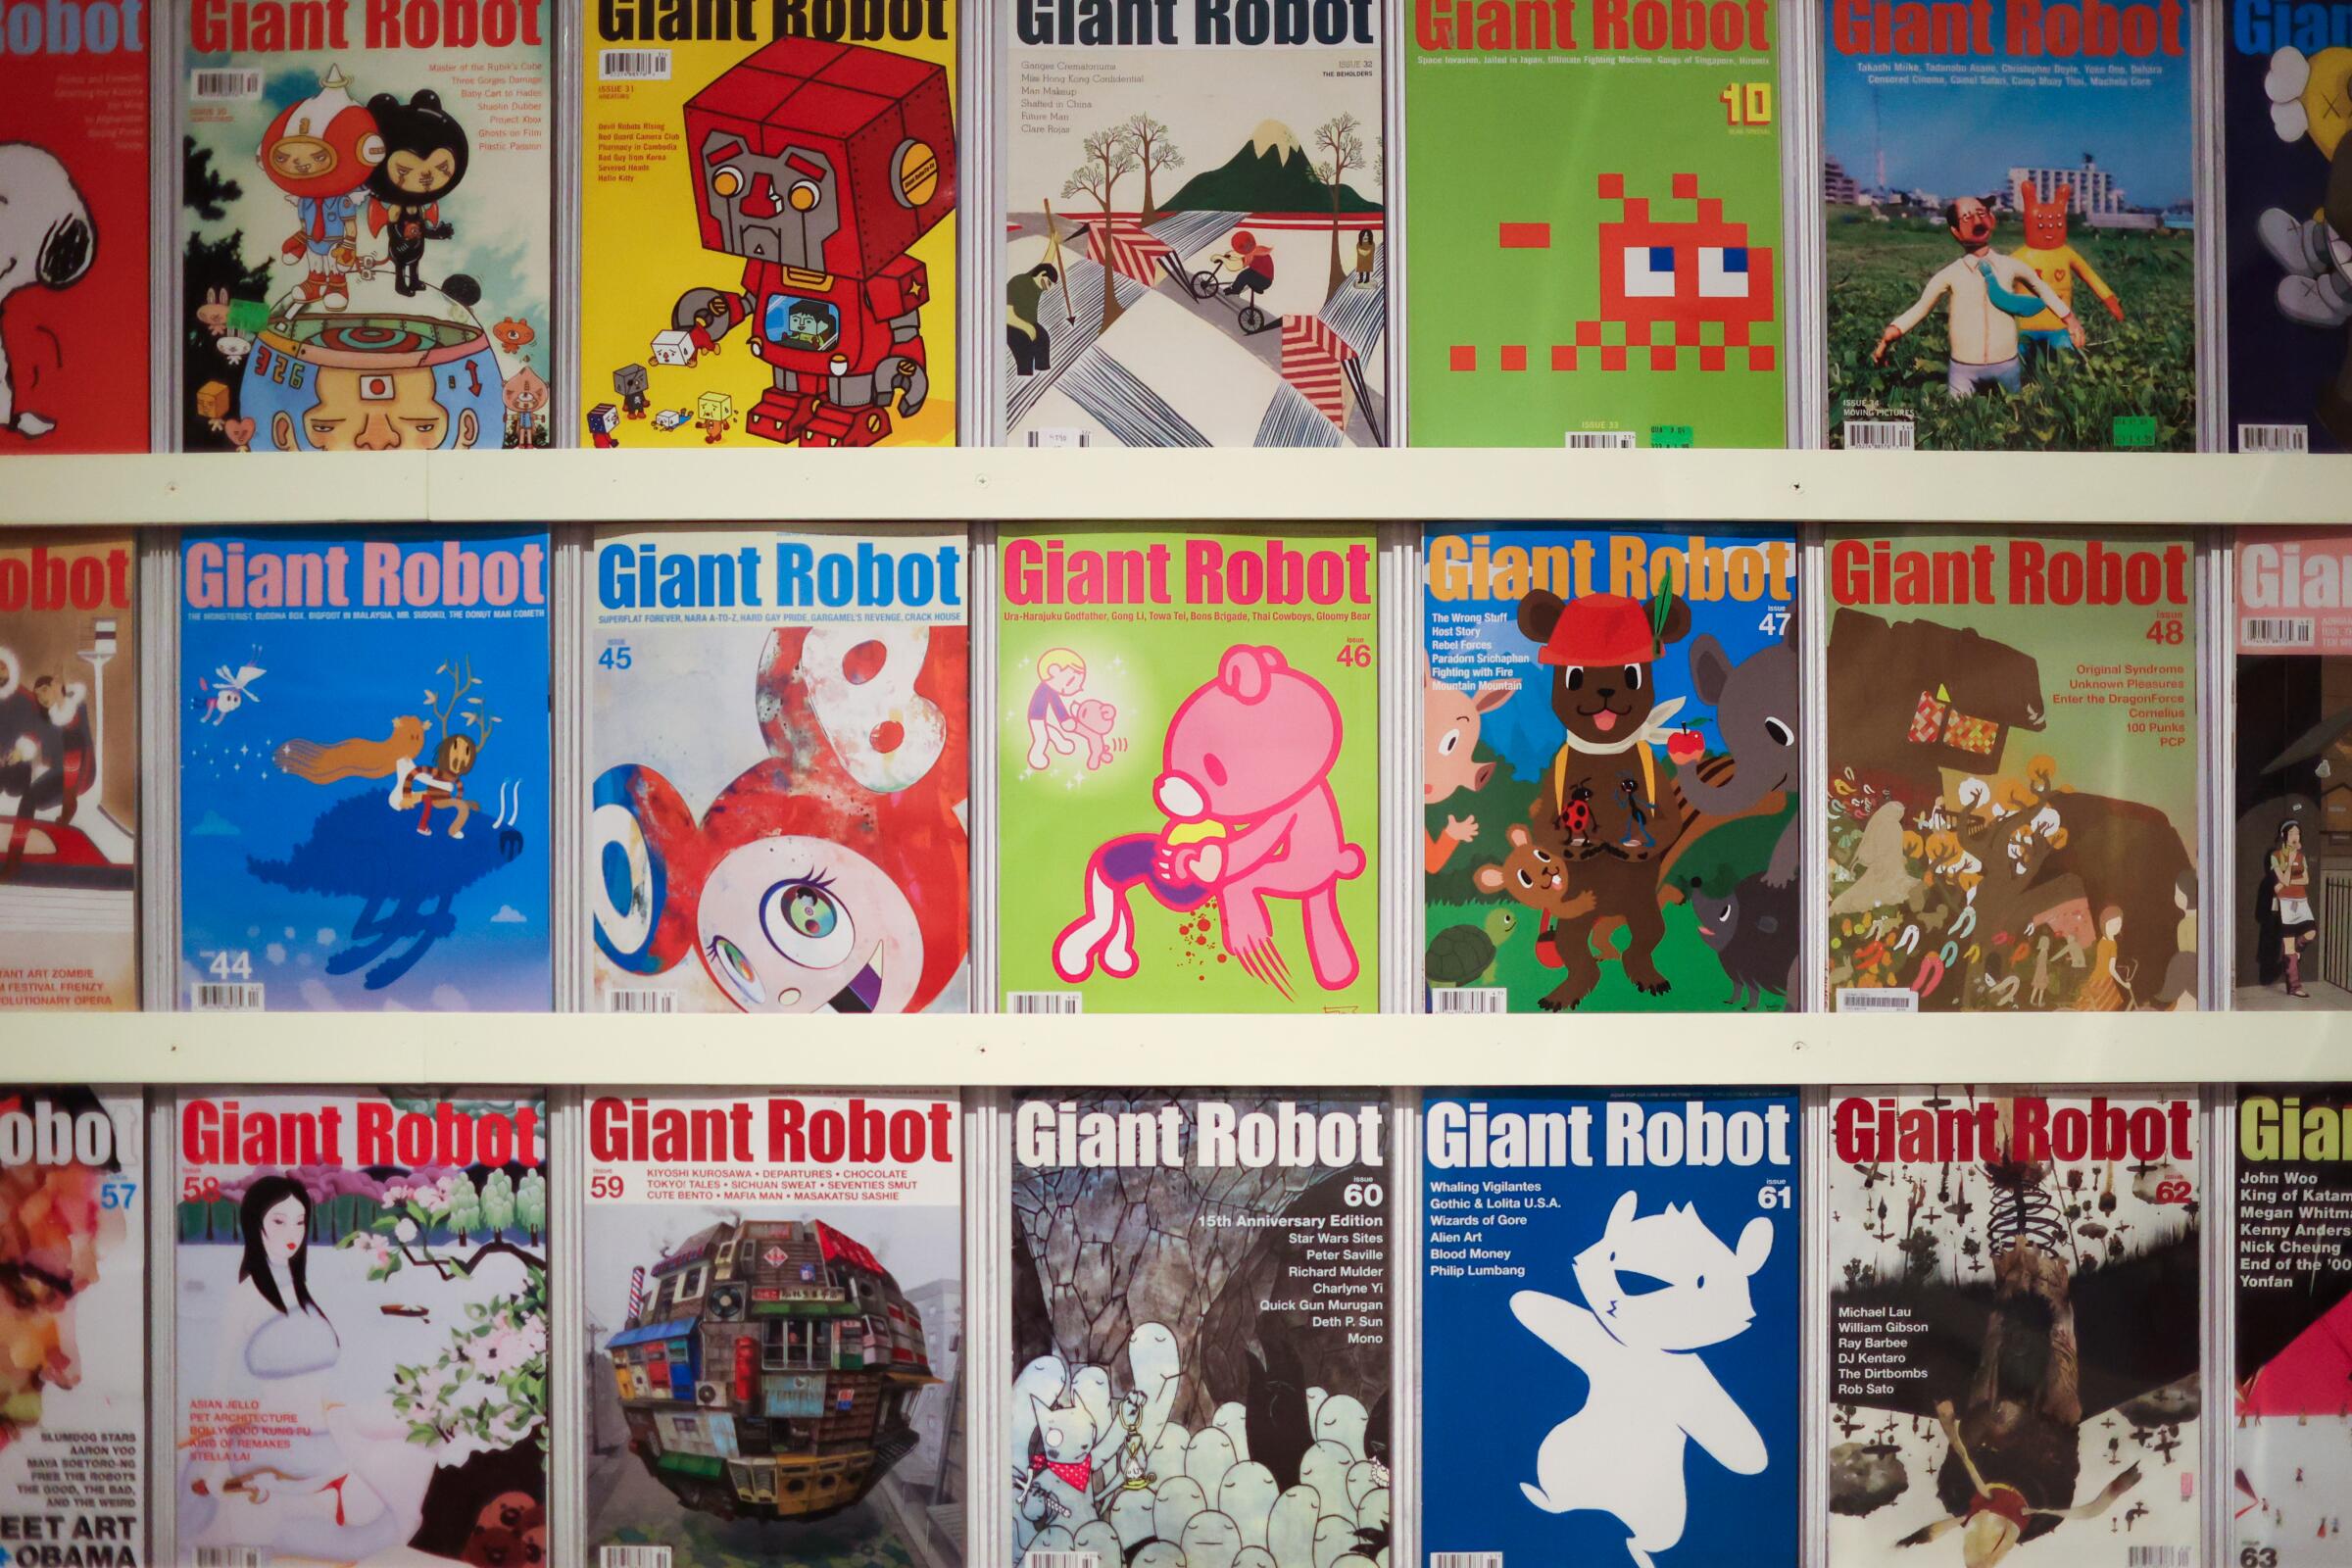 Magazine covers of Giant Robot are displayed at the Japanese American National Museum.